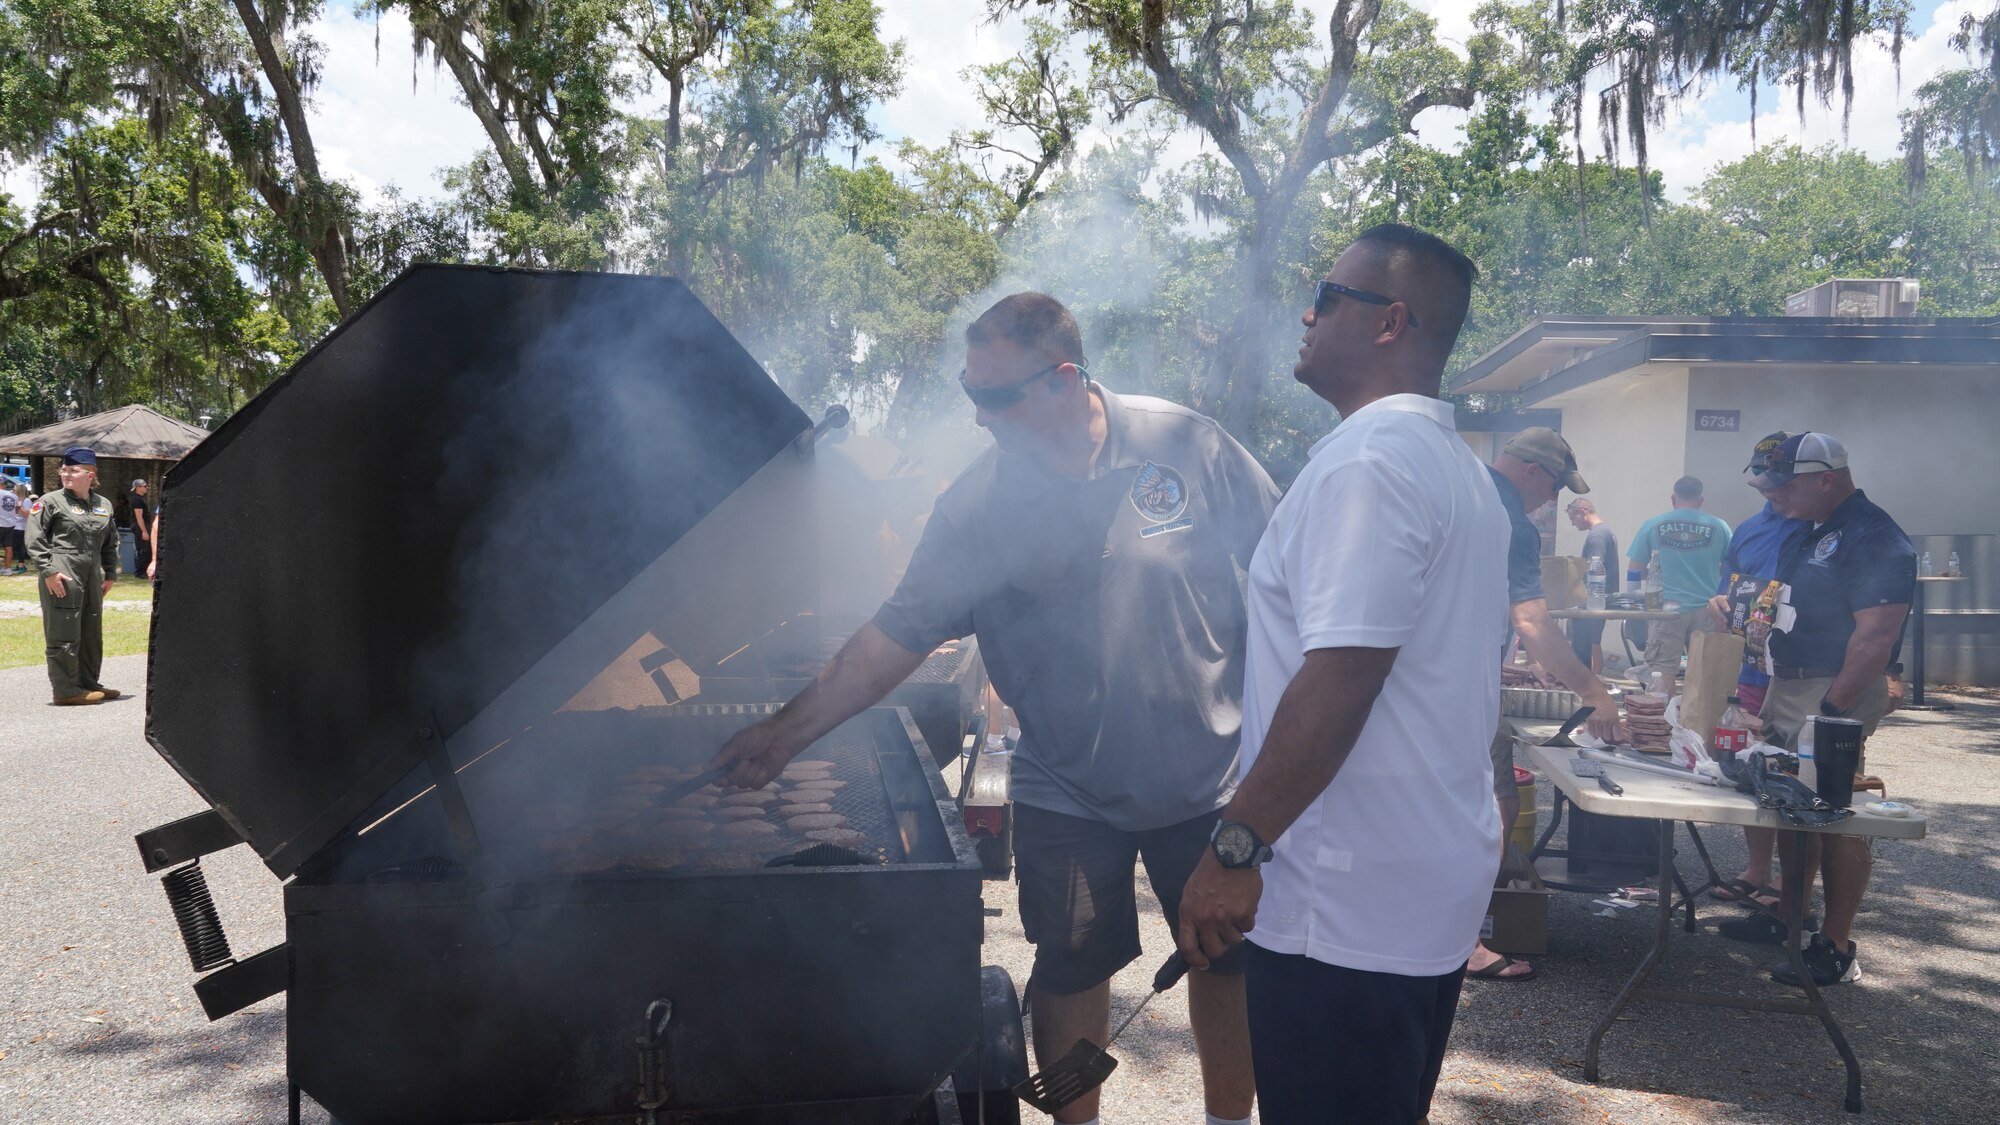 Chief Master Sgts. work the grills cooking during the family day celebration.